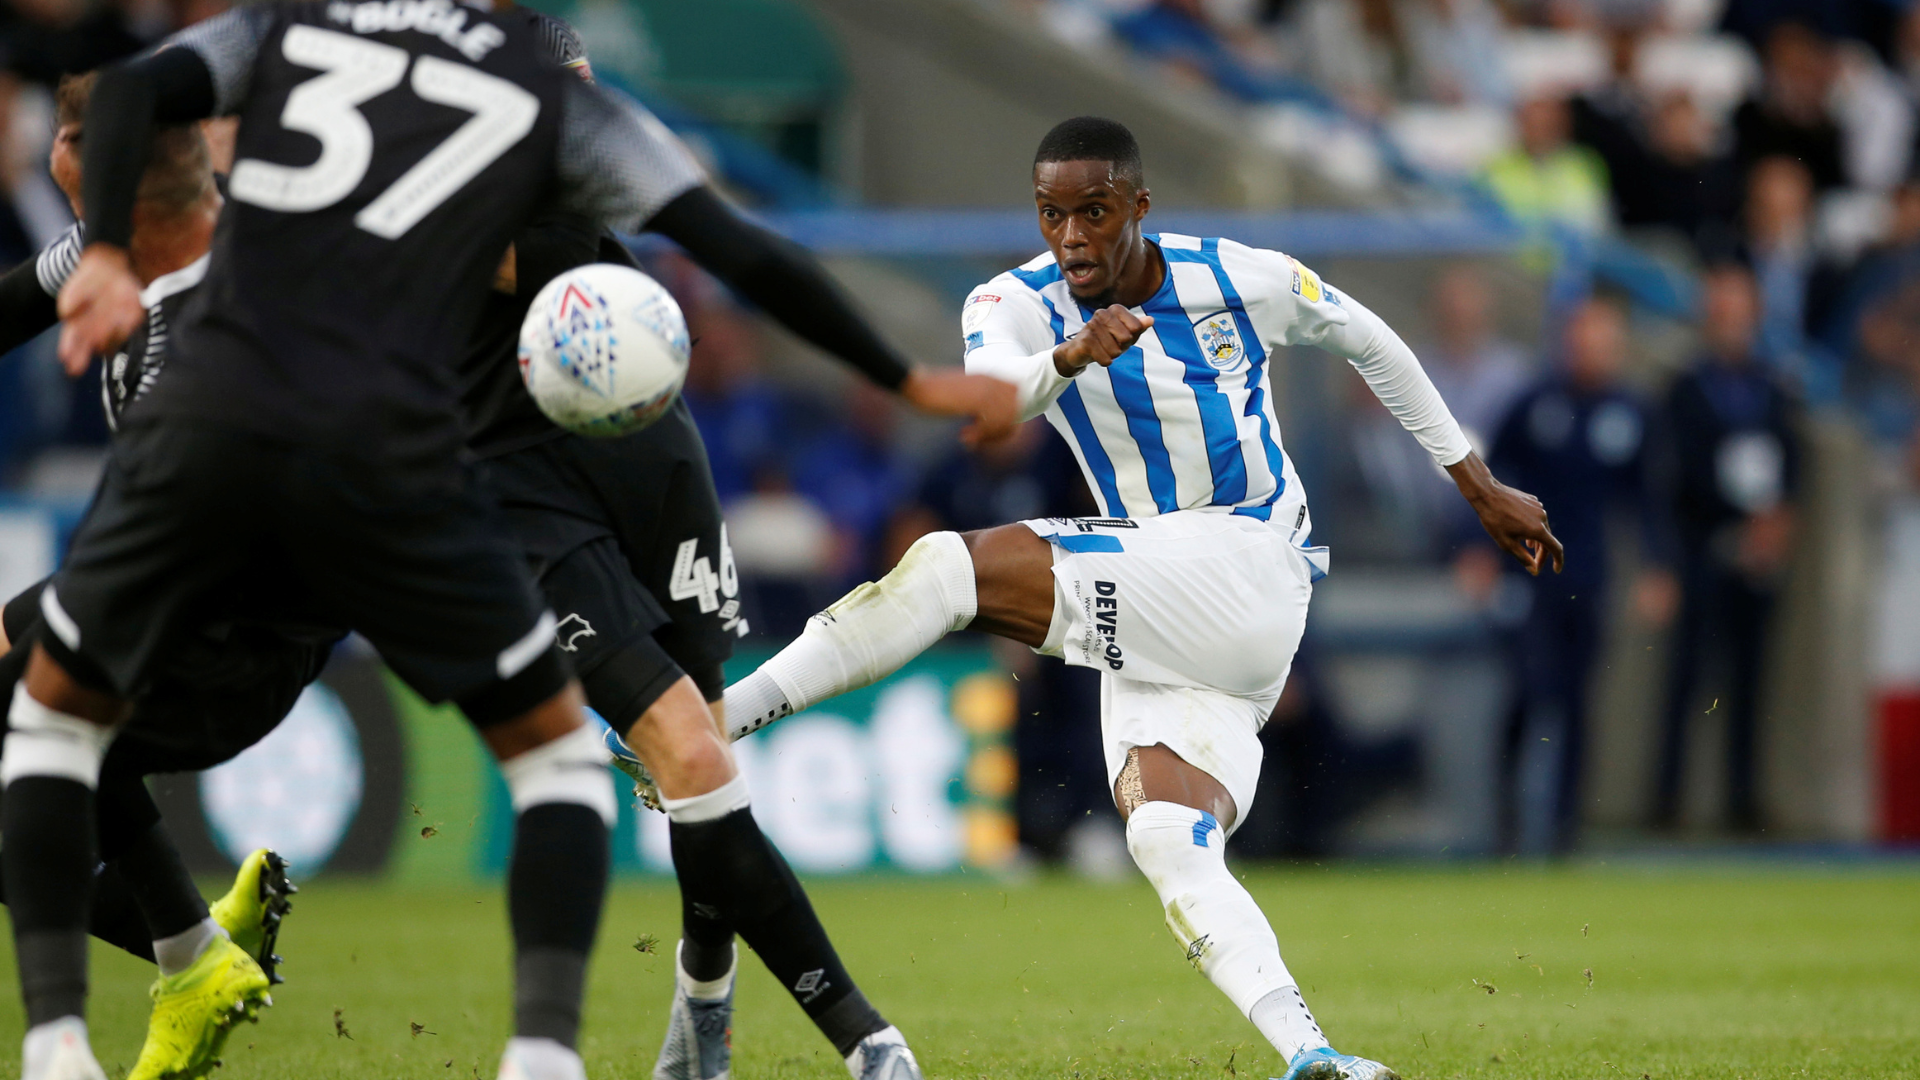 Adama Diakhaby for Huddersfield Town